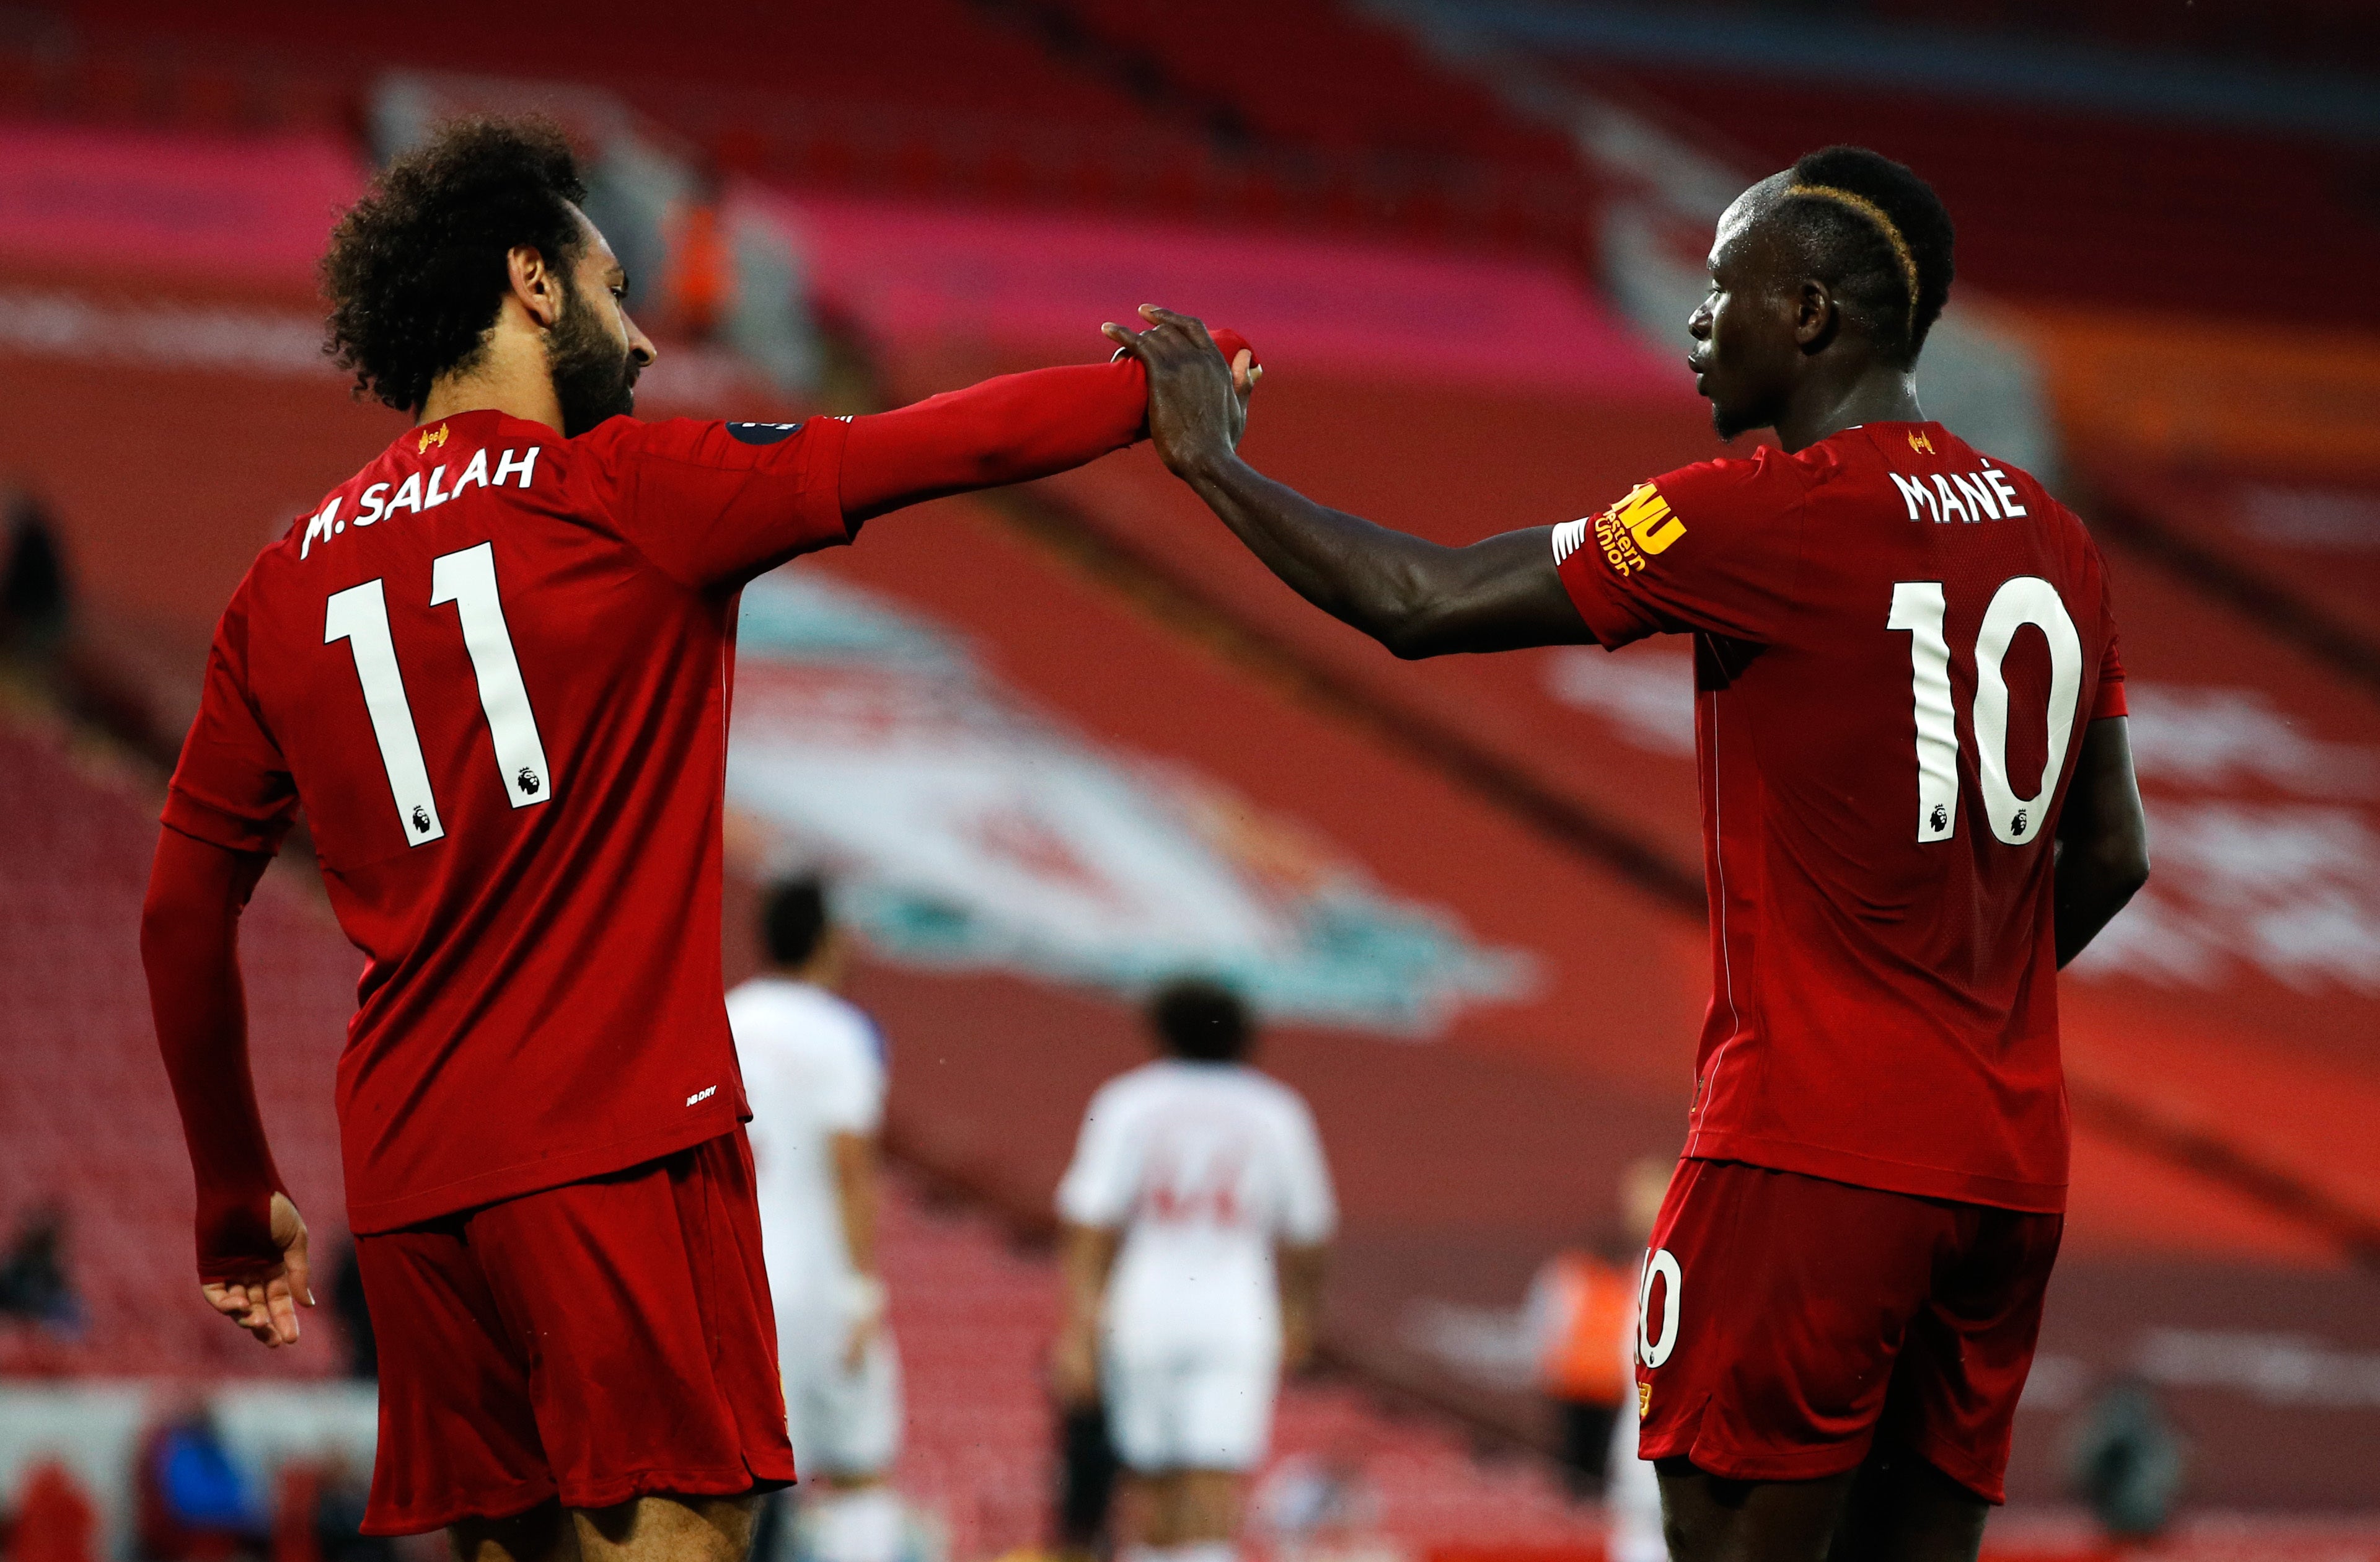 Sadio Mane and Mohamed Salah celebrate a goal for Liverpool against Crystal Palace (Phil Noble/NMC Pool/PA)